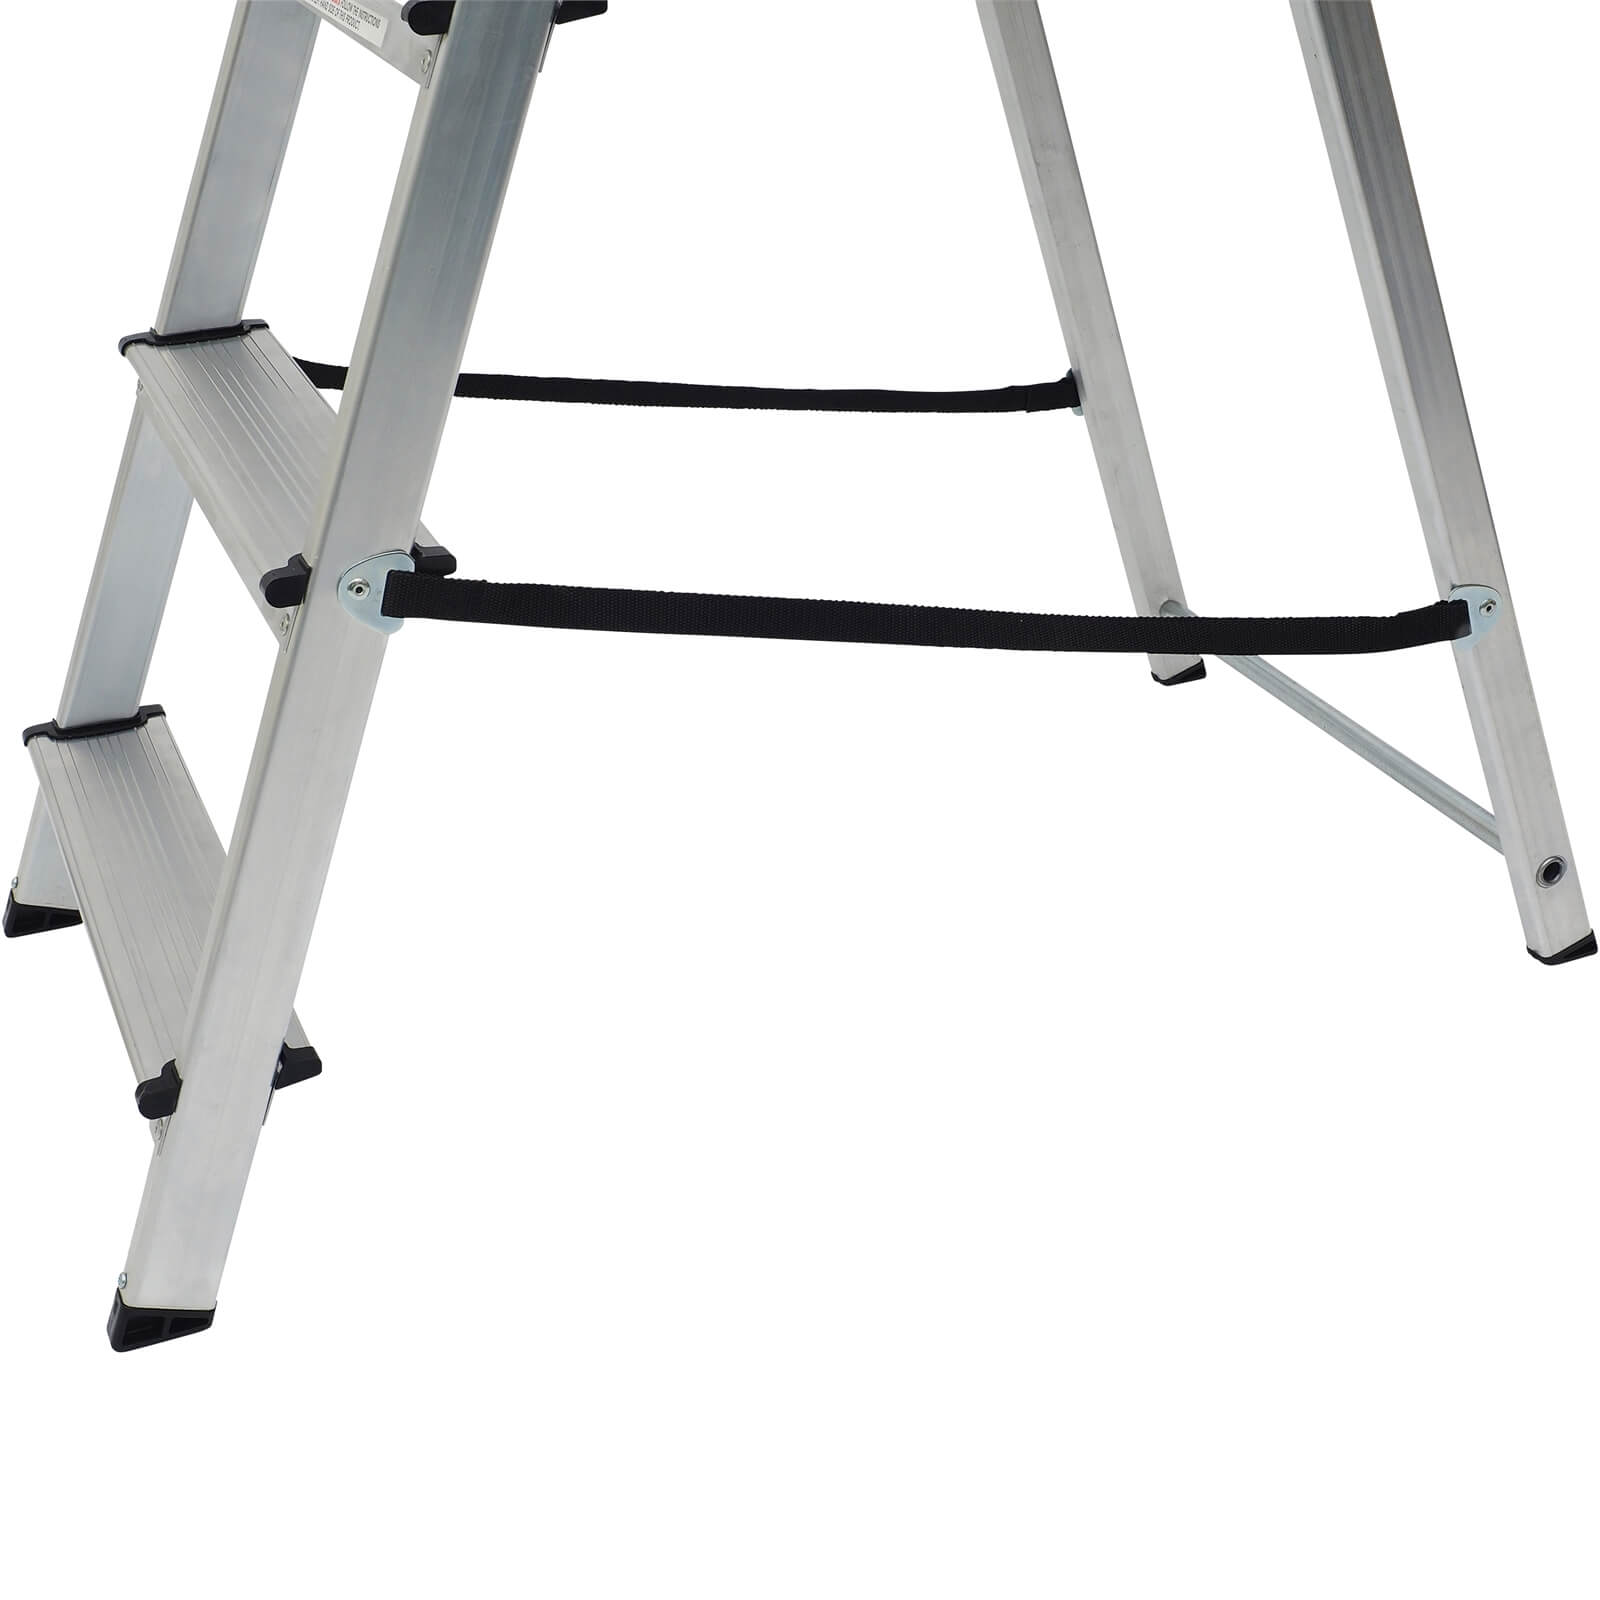 Werner High Handrail Step Ladder with Tool Tray - 7 Tread